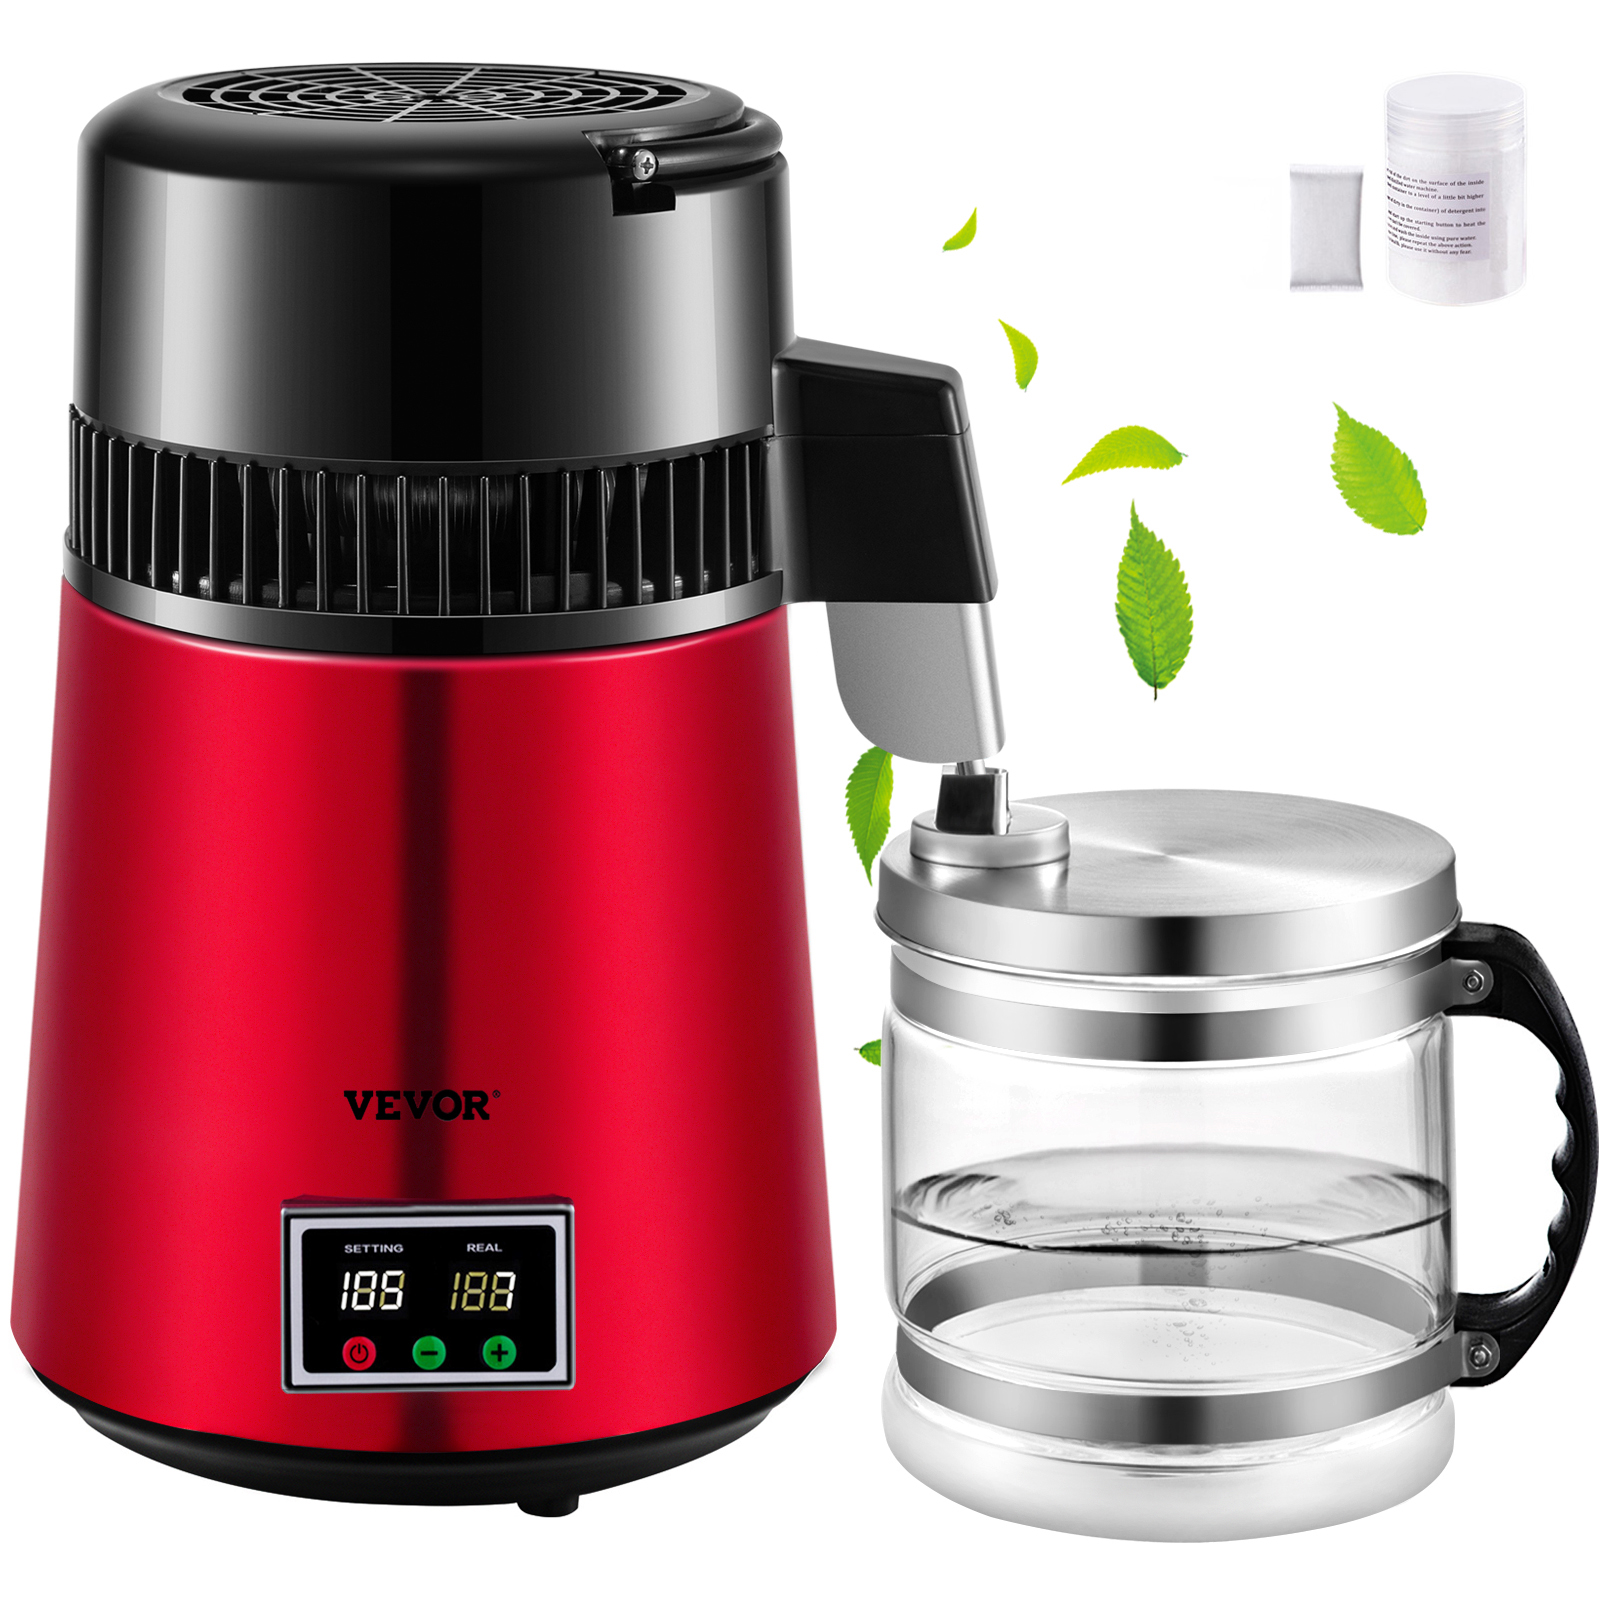 VEVOR 750W 6 Gal/D Water Distiller 304 Stainless Steel Electric Kettle with Automatic Shut-Off and Water Filtration | BST-007ZLSJ000001V1